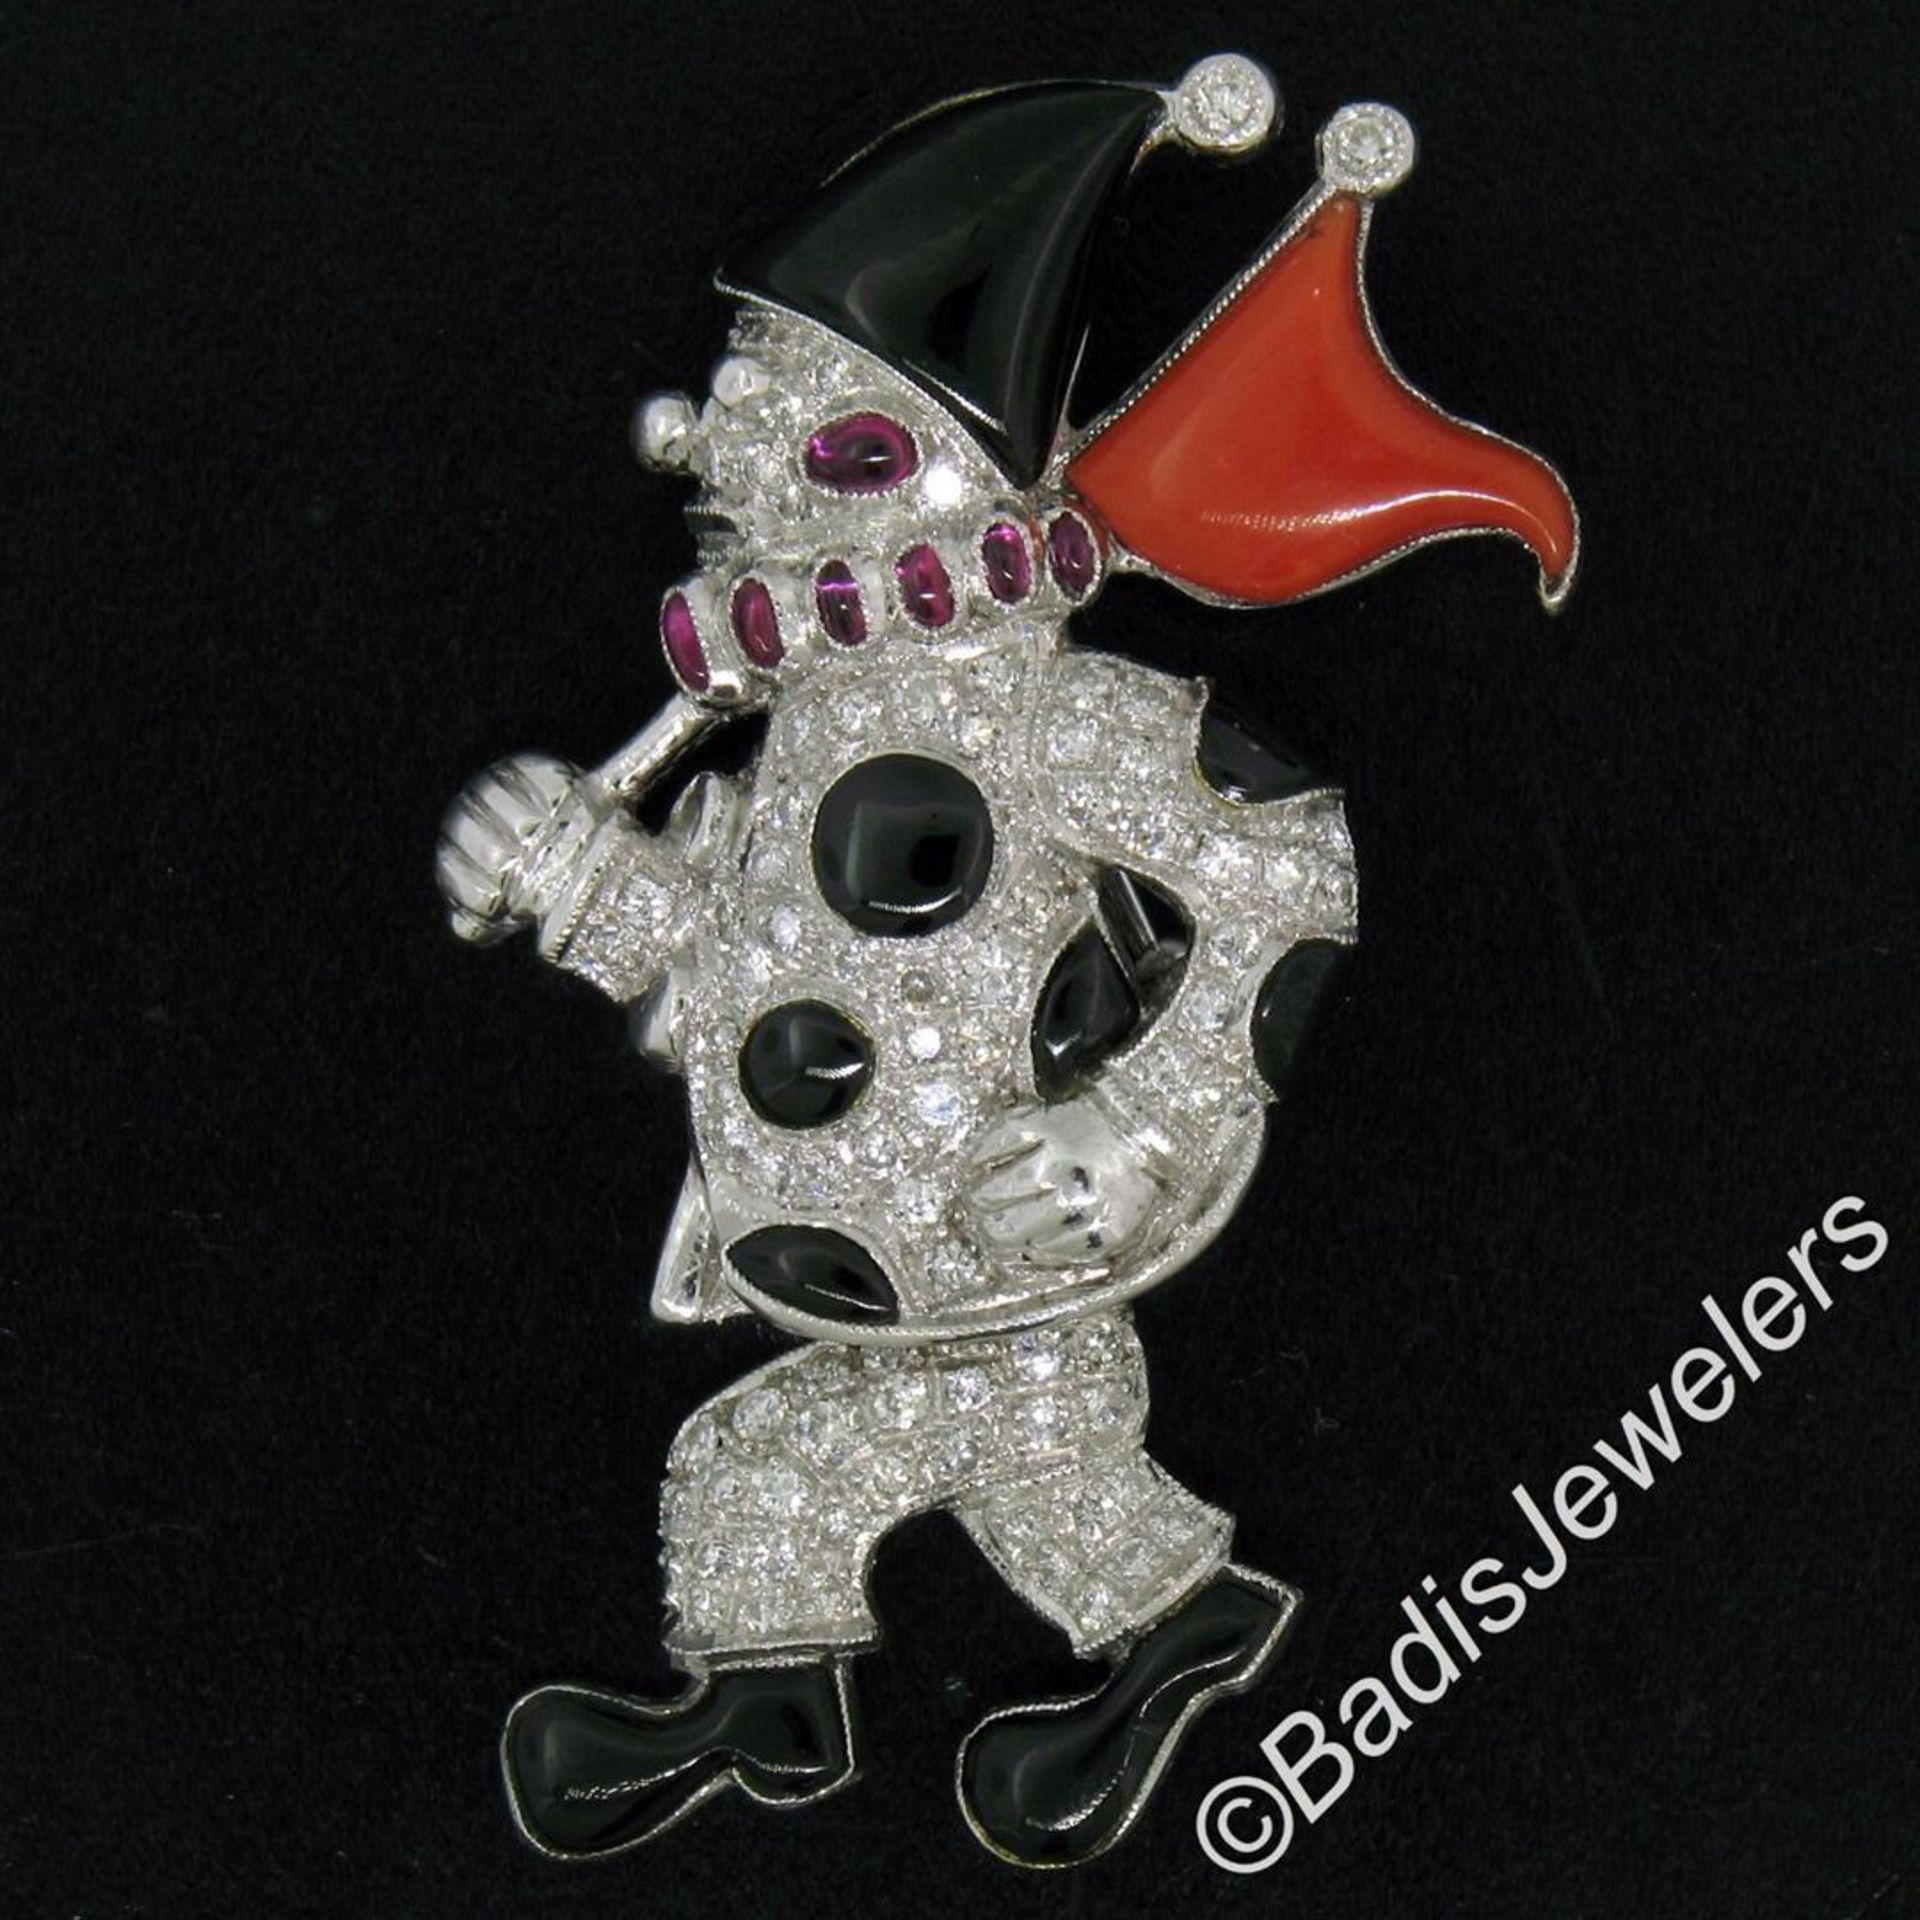 Vintage 18kt White Gold Diamond Black Onyx and Coral Clown Brooch Pin - Image 3 of 7